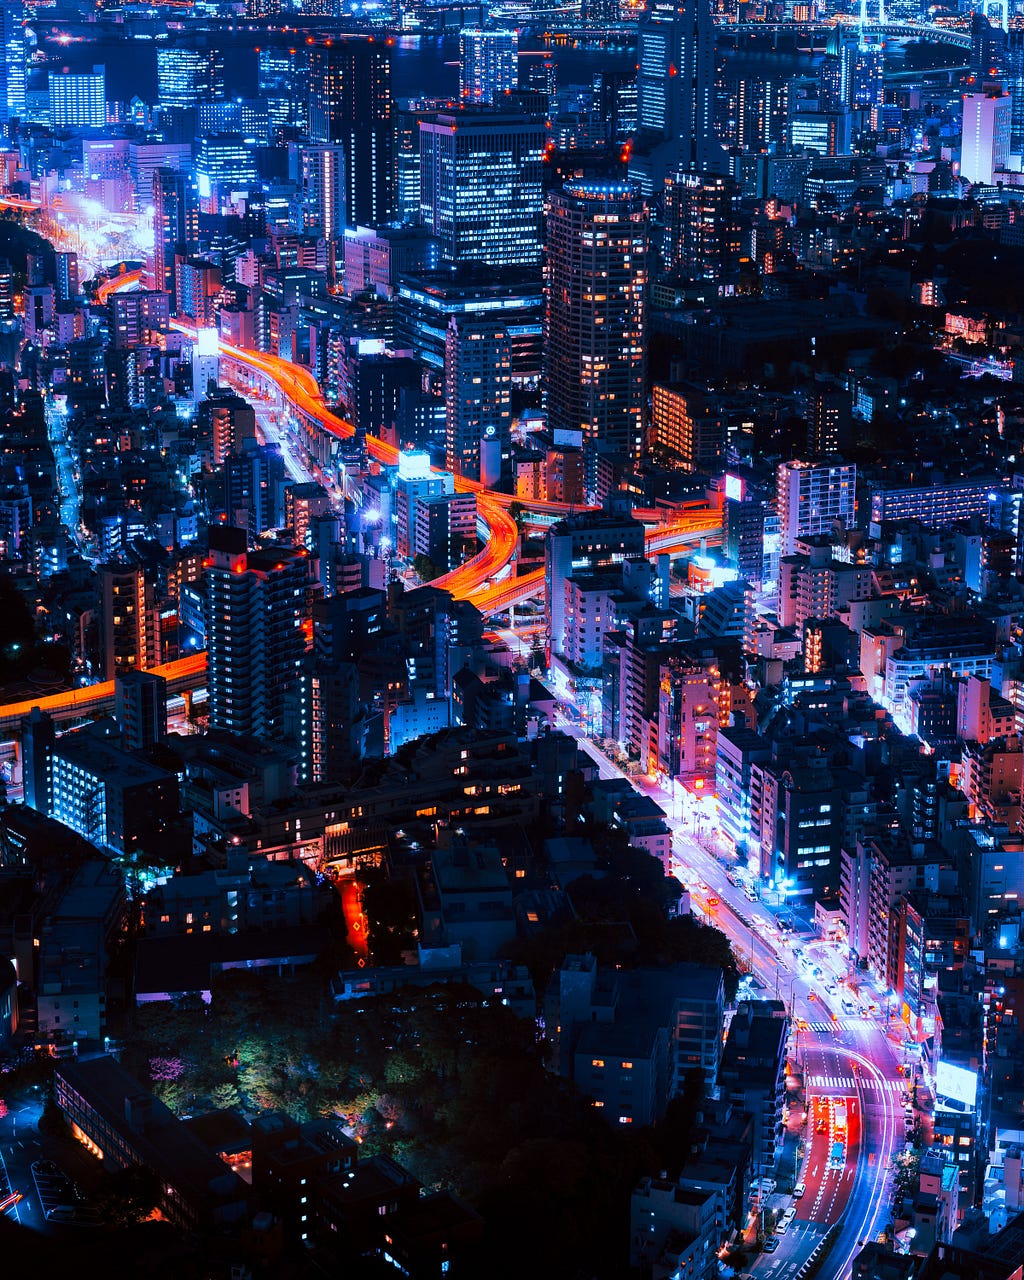 Night-time cityscape of high-rises as far as the eye can see. The buildings twinkle in iridescent blues and violets. Bright rivers of white and amber stream through long-exposed streets. Look at the collective power of society when we work together in harmony and mutual support.